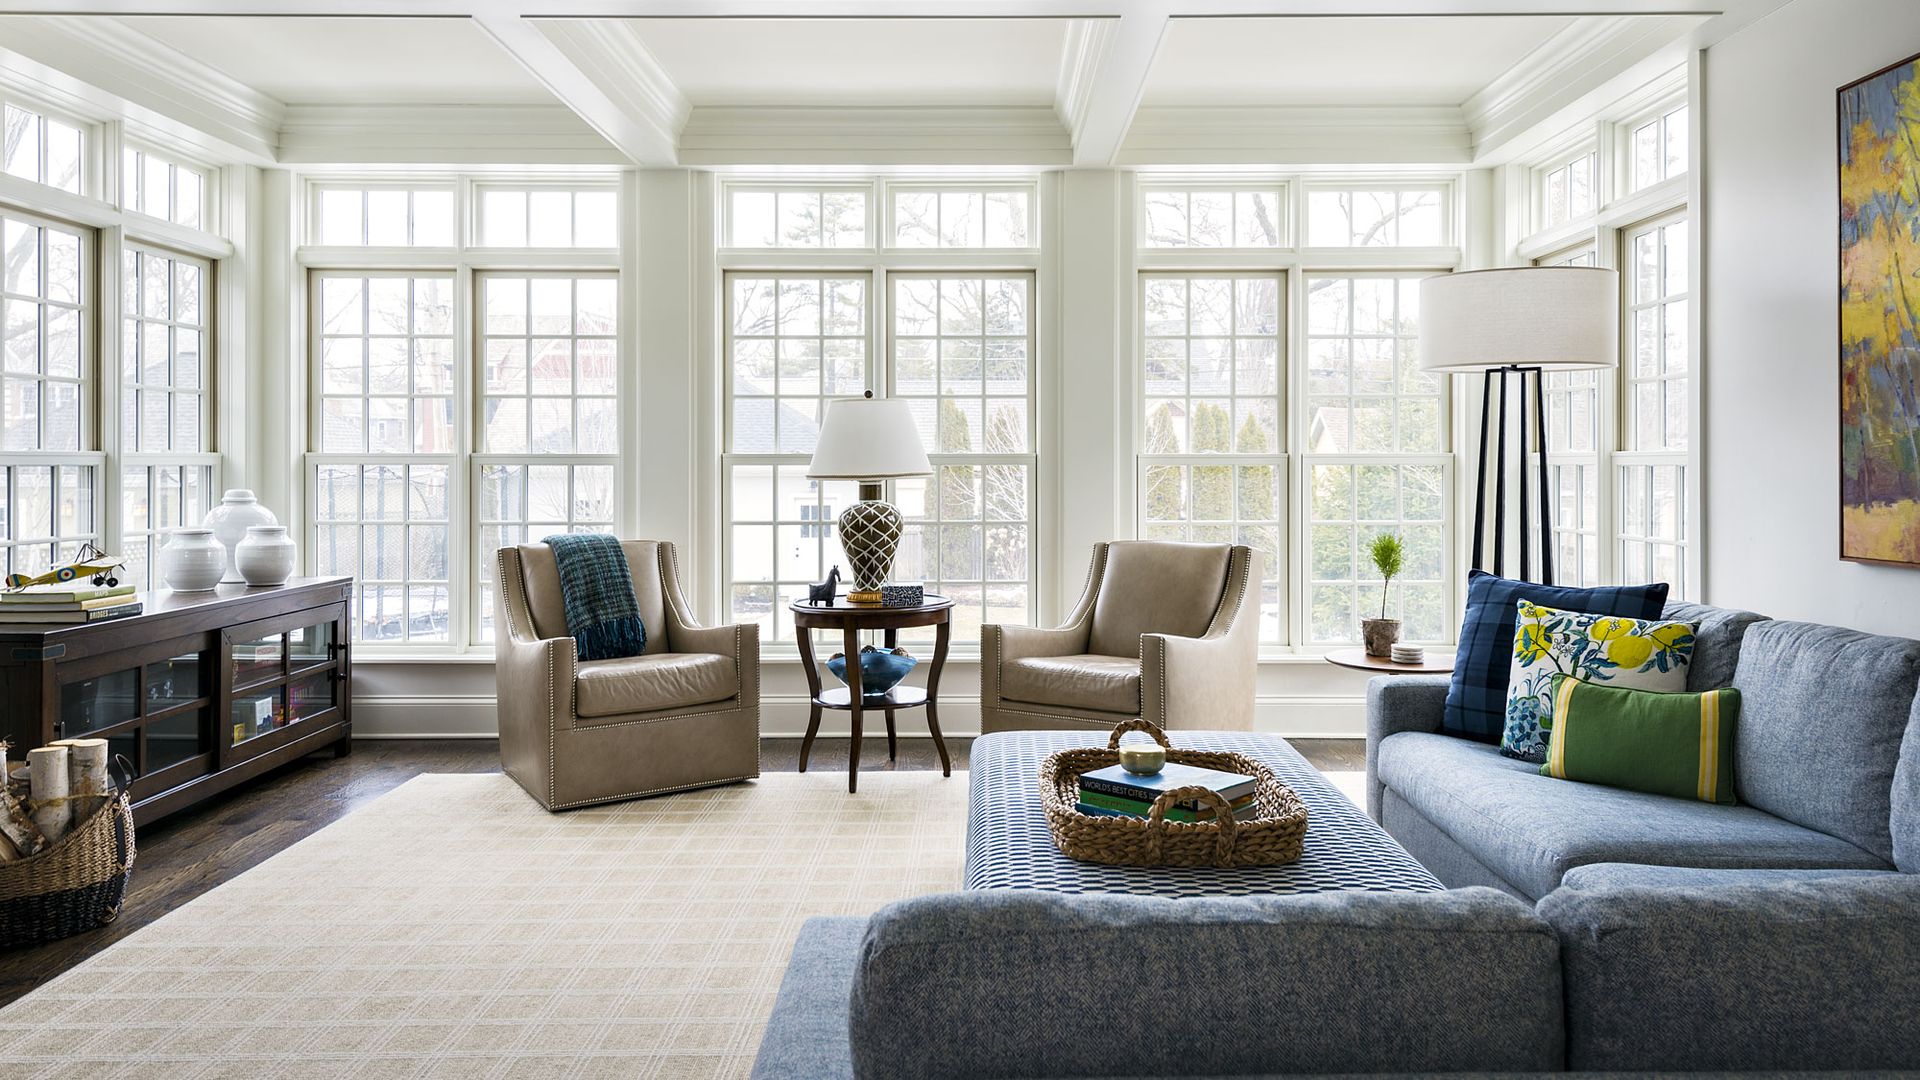 8 interior design tricks to steal from this light-filled Lake Michigan ...